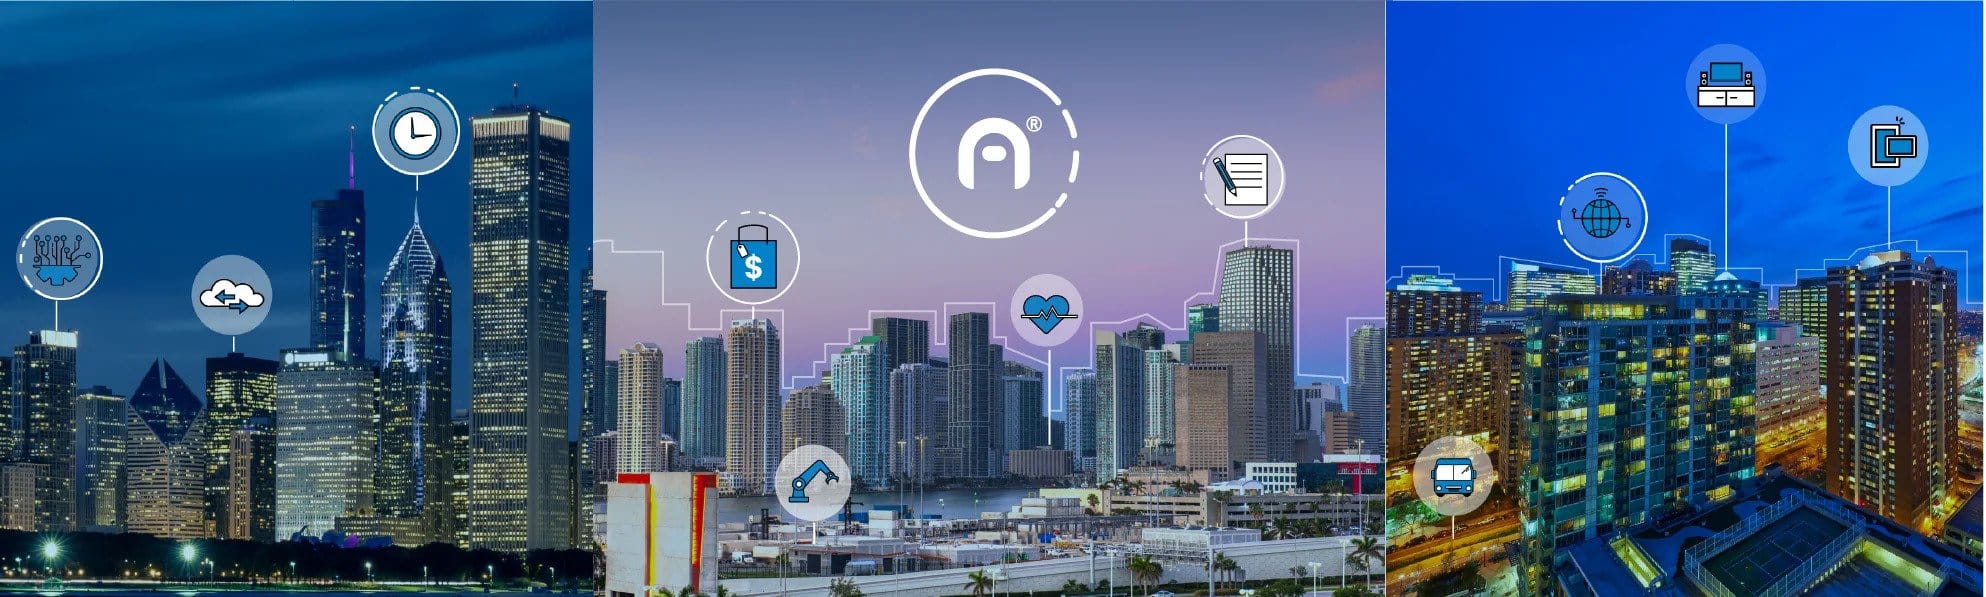 Azulle: Shaping the Future of Smart Cities